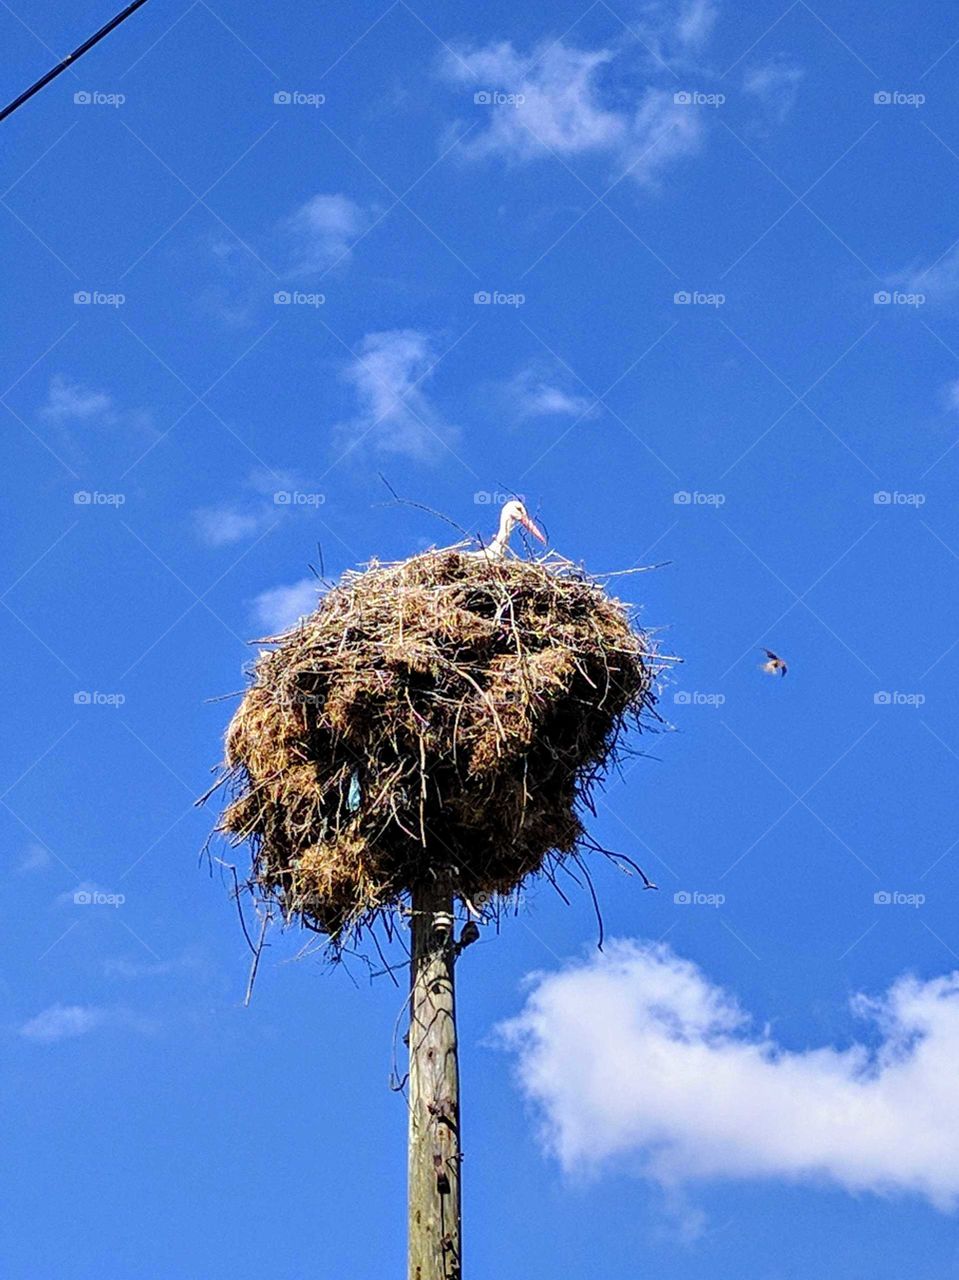 Picture taken in the countryside of Turkey. A stork sitting in its nest on a hot summer day.